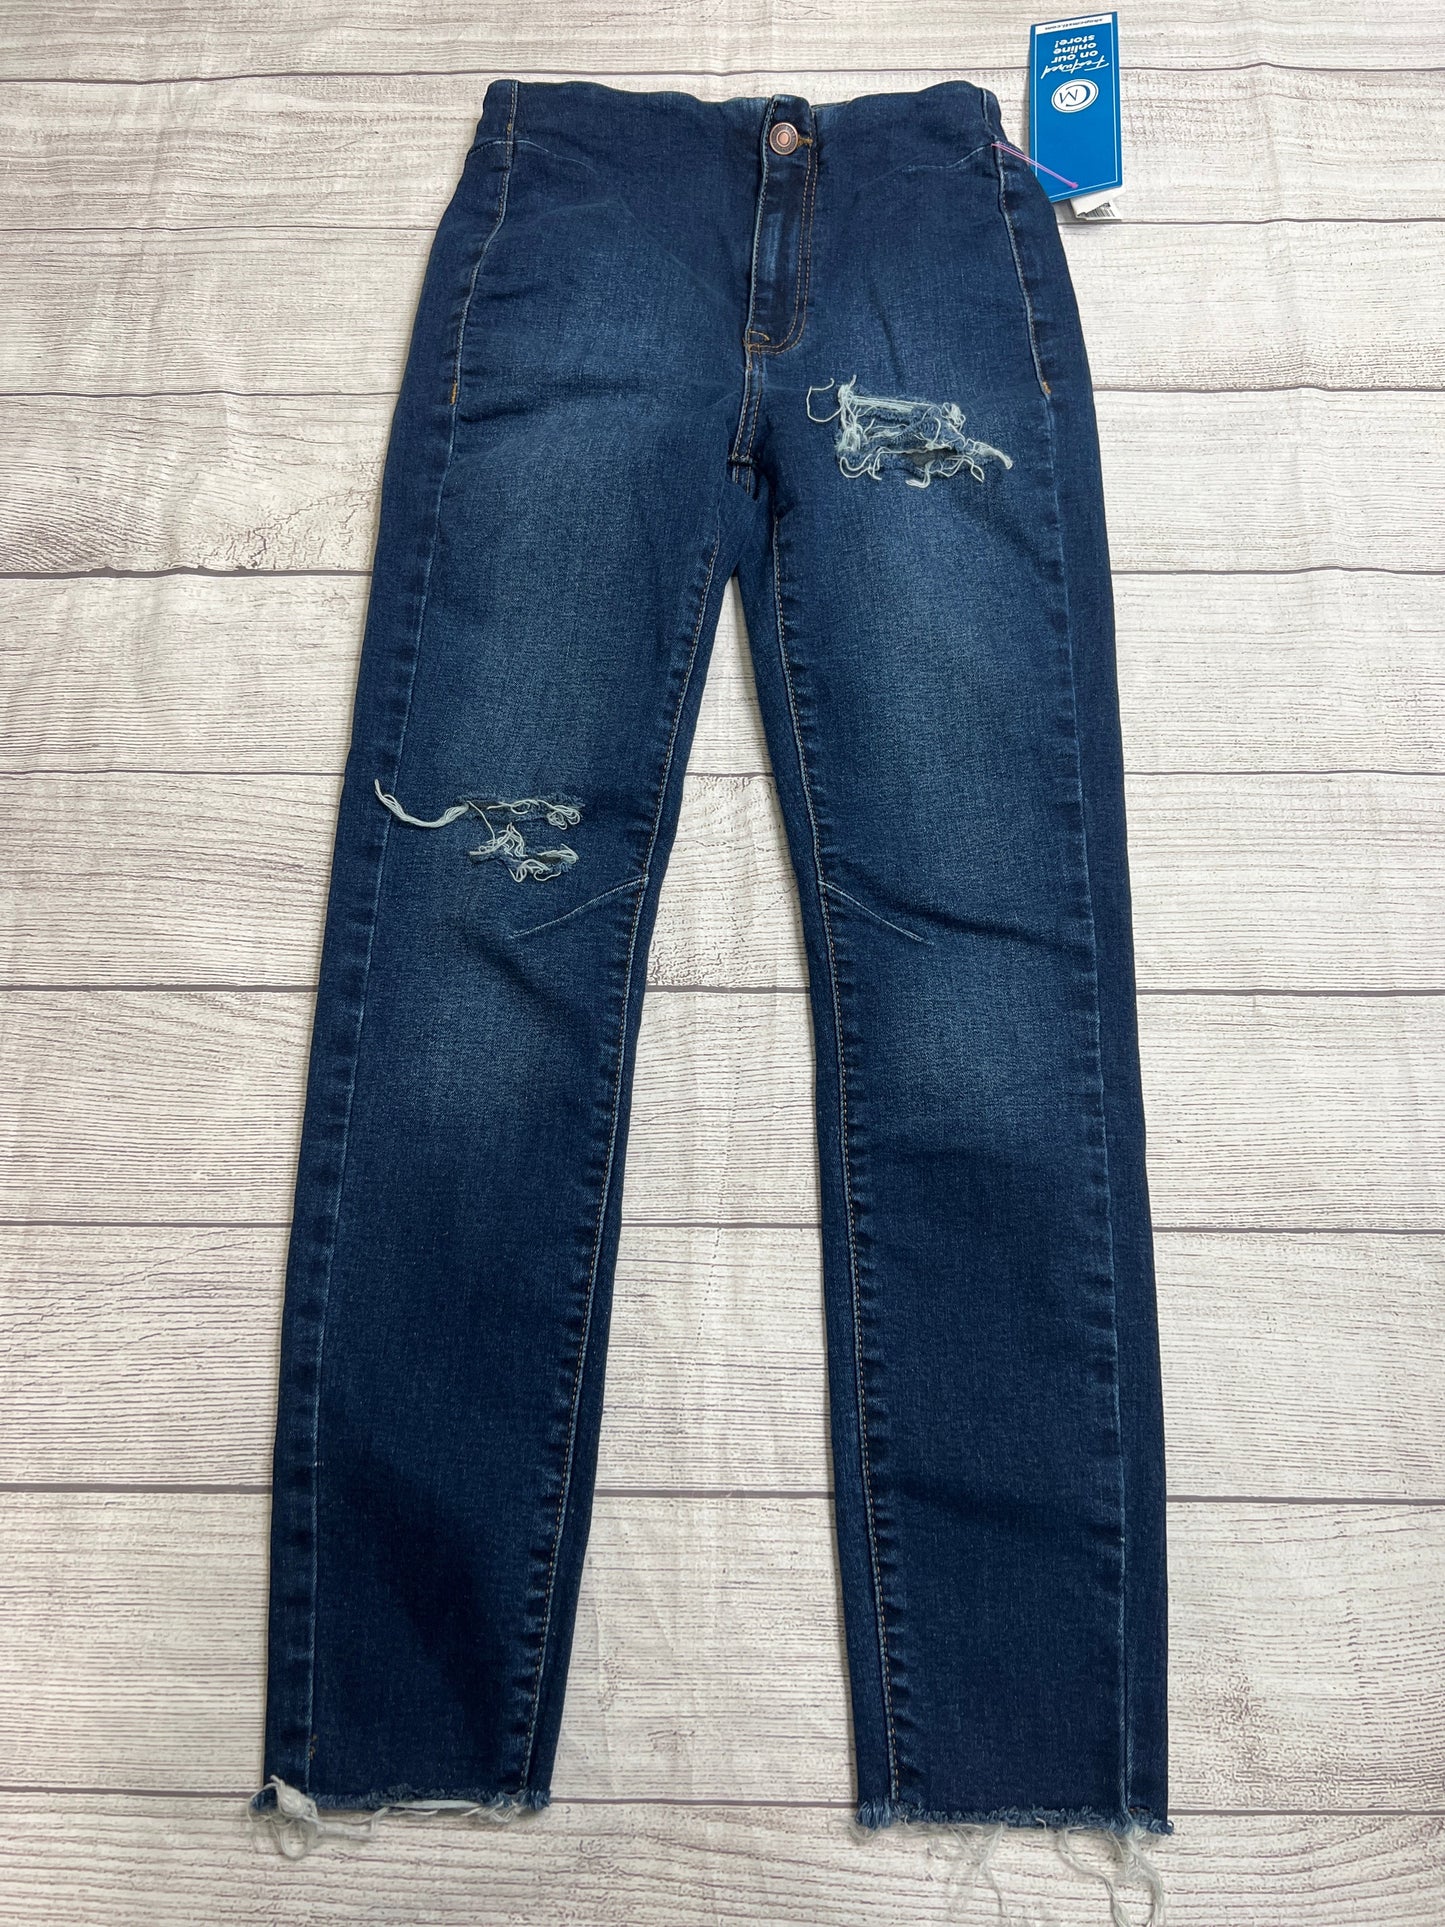 Jeans Skinny By Free People  Size: 2/28